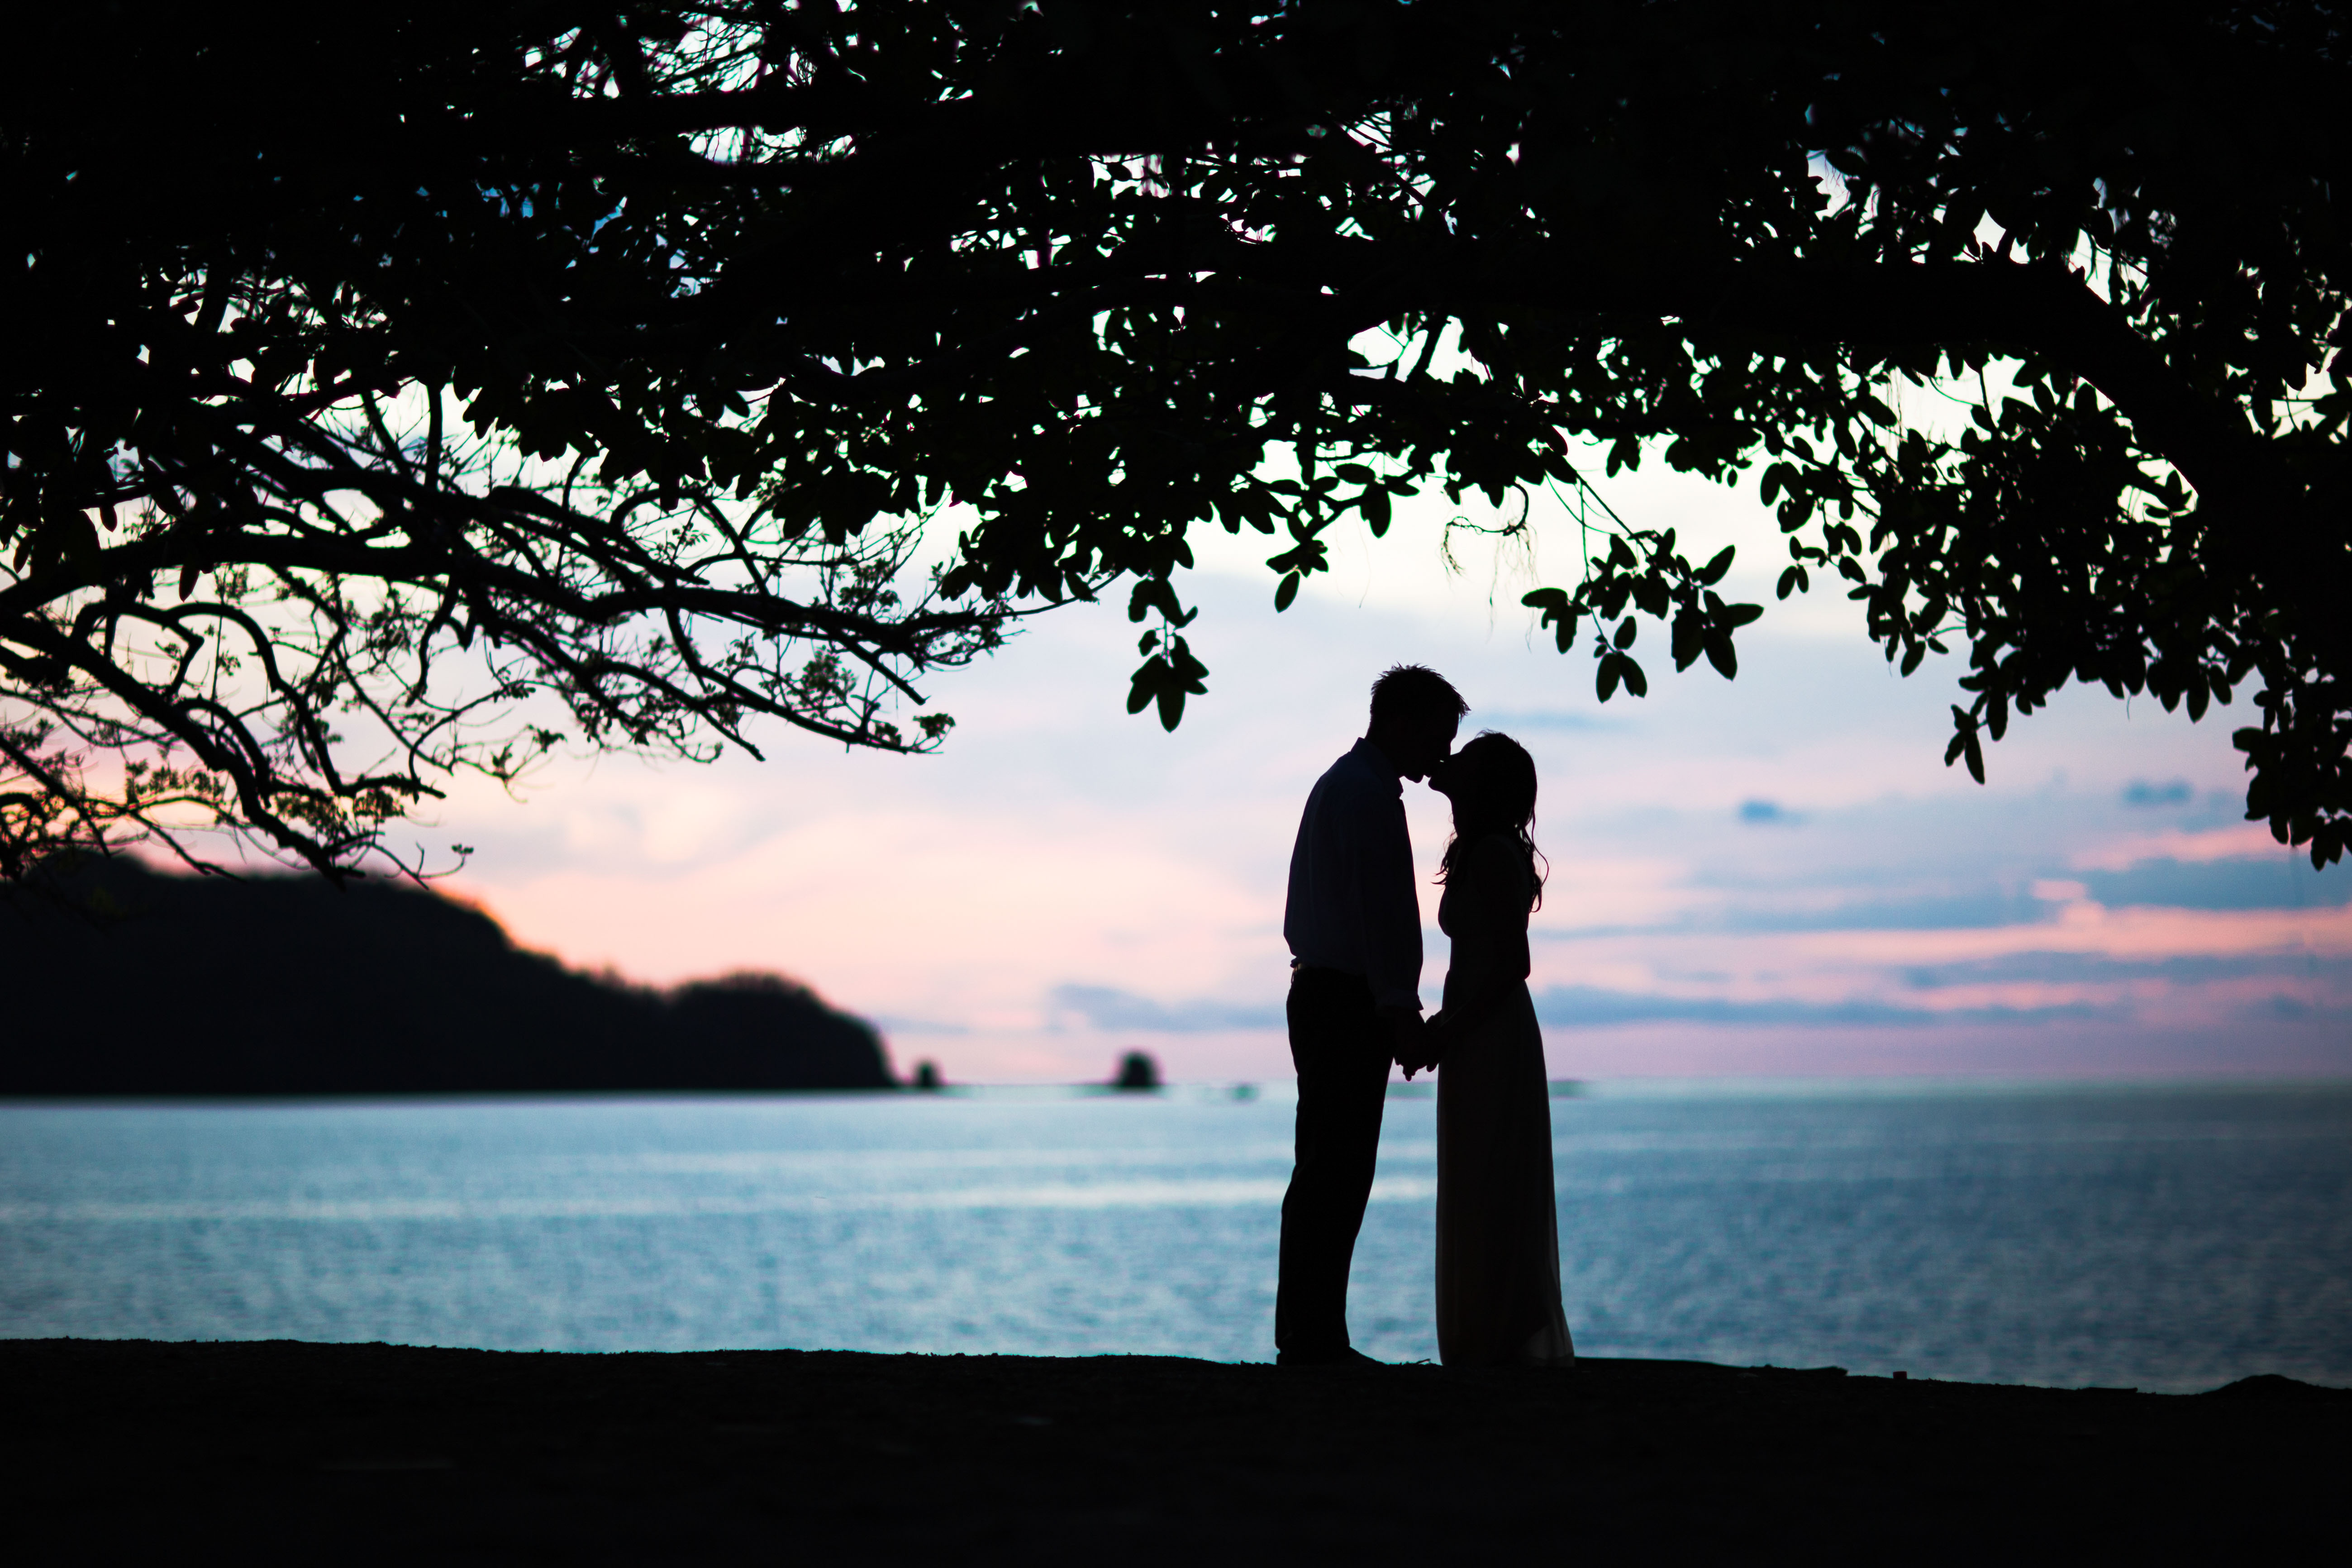 local traditions to incorporate into your Tamarindo wedding